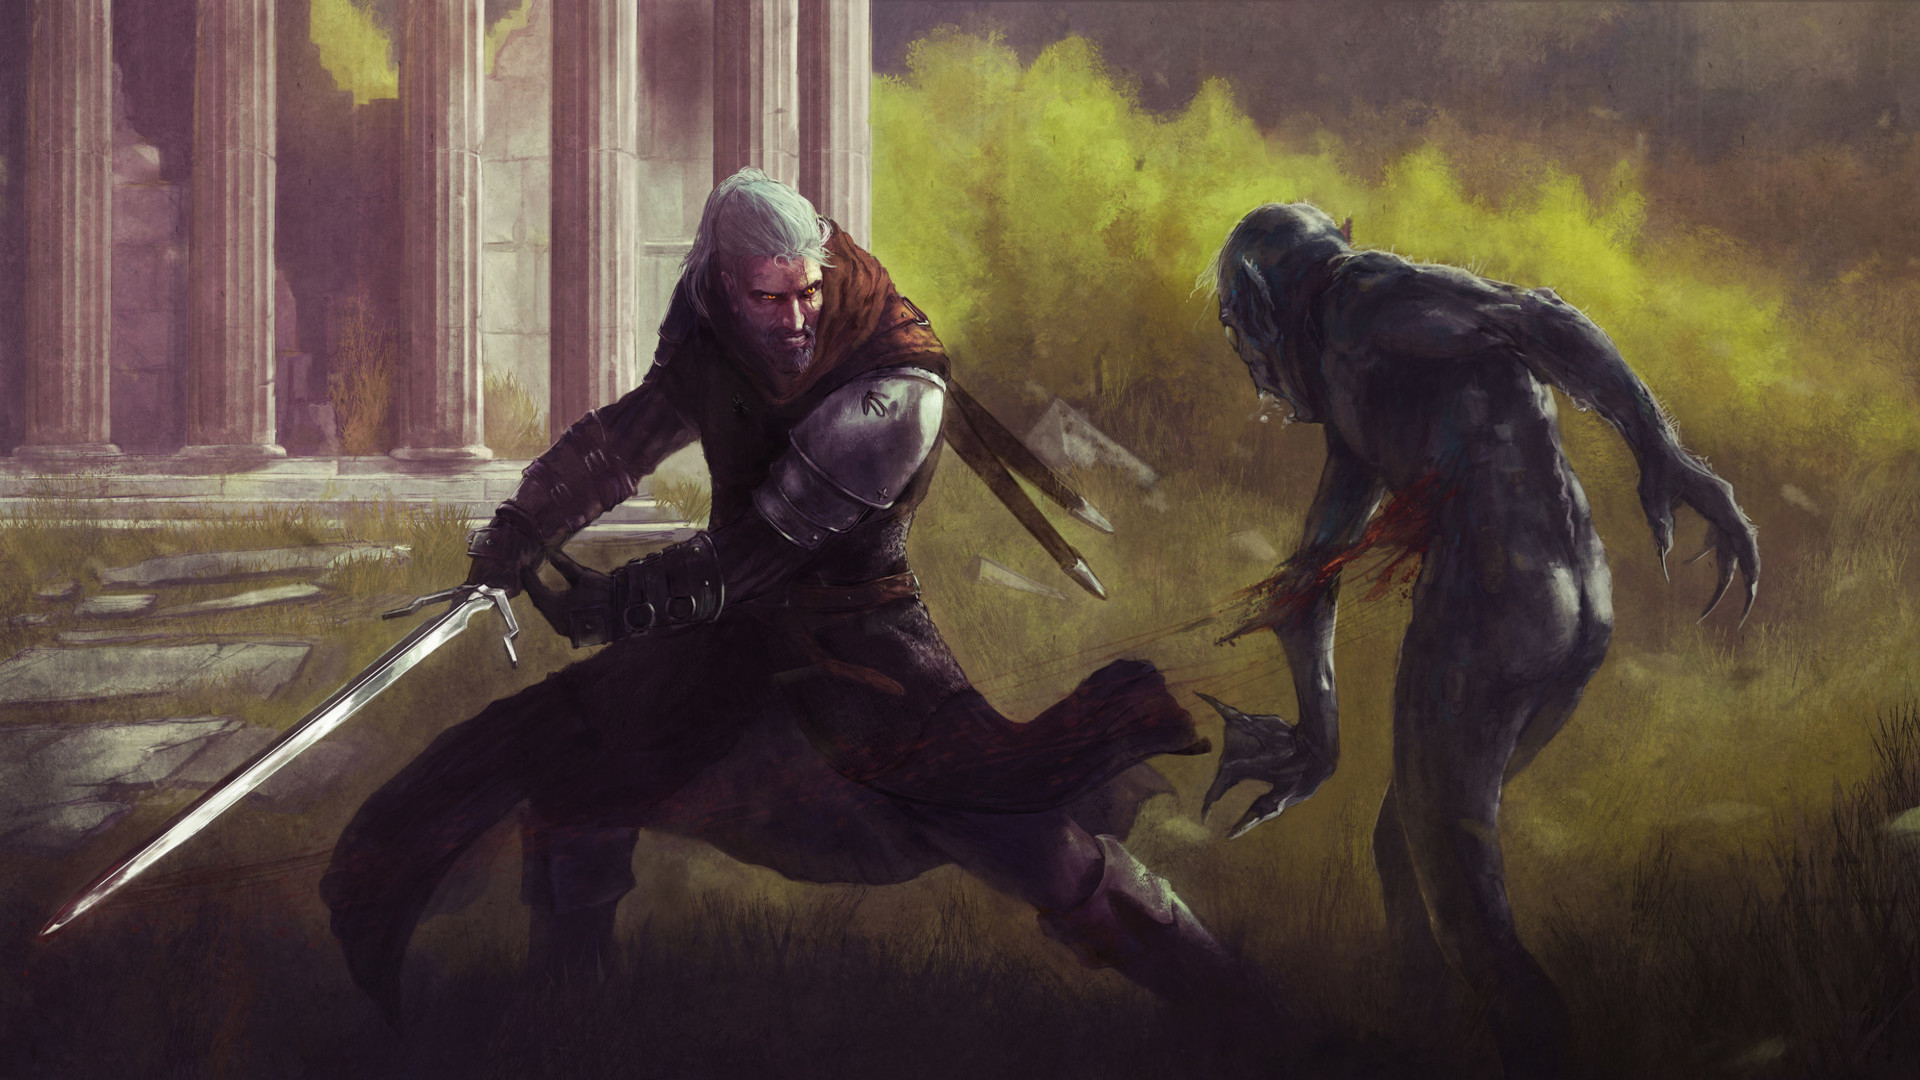 Geralt Of Rivia Sword Drowner The Witcher Fight 1920x1080